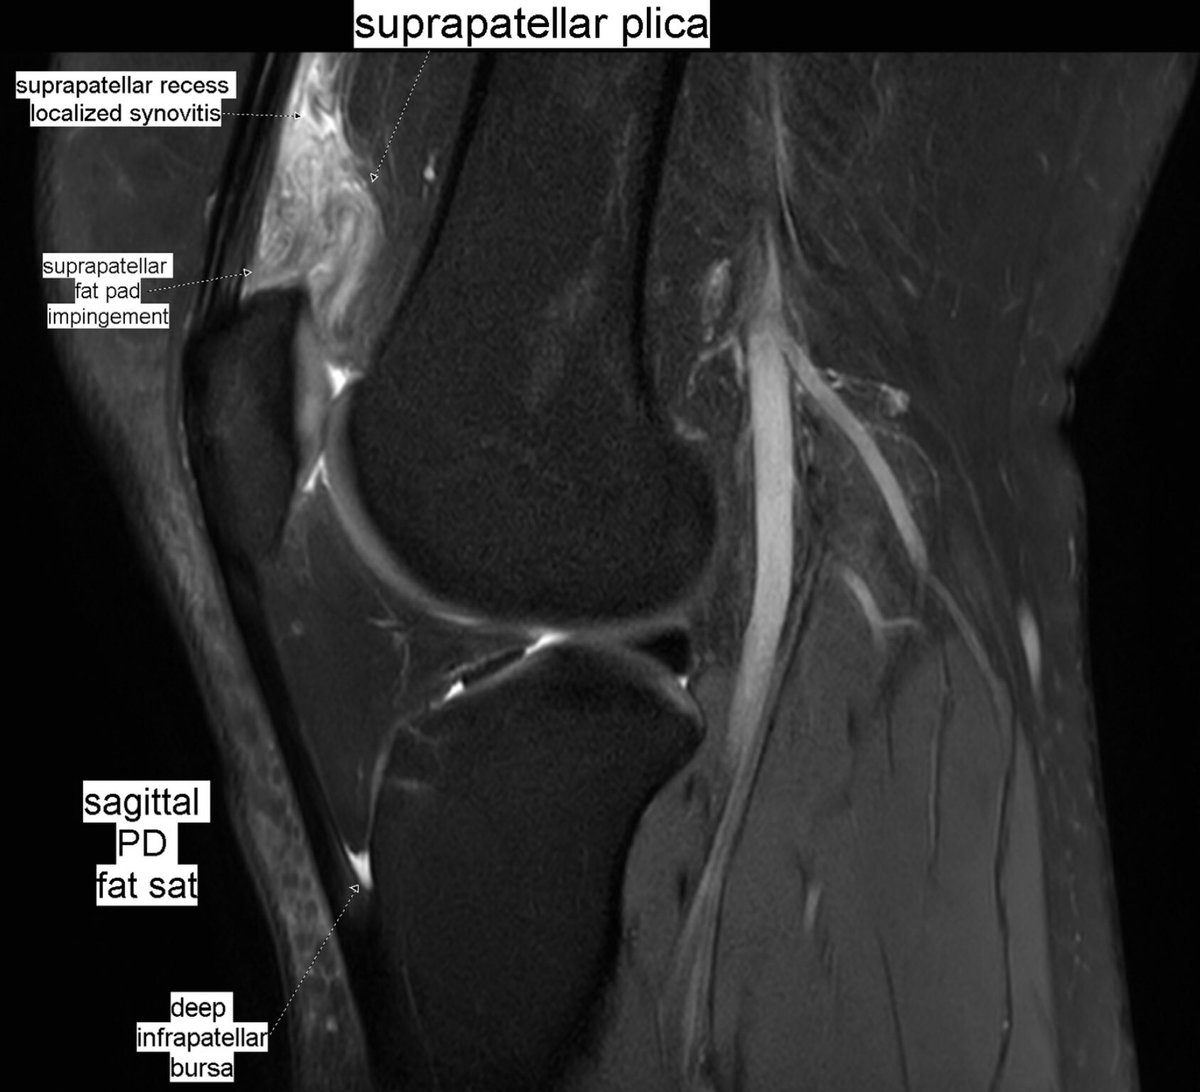 Above head and shoulder Resistant recorder Benoît Rizk on Twitter: "Patient with anterior knee pain. Localized  synovitis of suprapatellar recess and suprapatellar fat pad impingement  syndrome secondary to a suprapatellar plica: suprapatellar plica syndrome.  #MSKrad #knee #orthopaedics #radiology